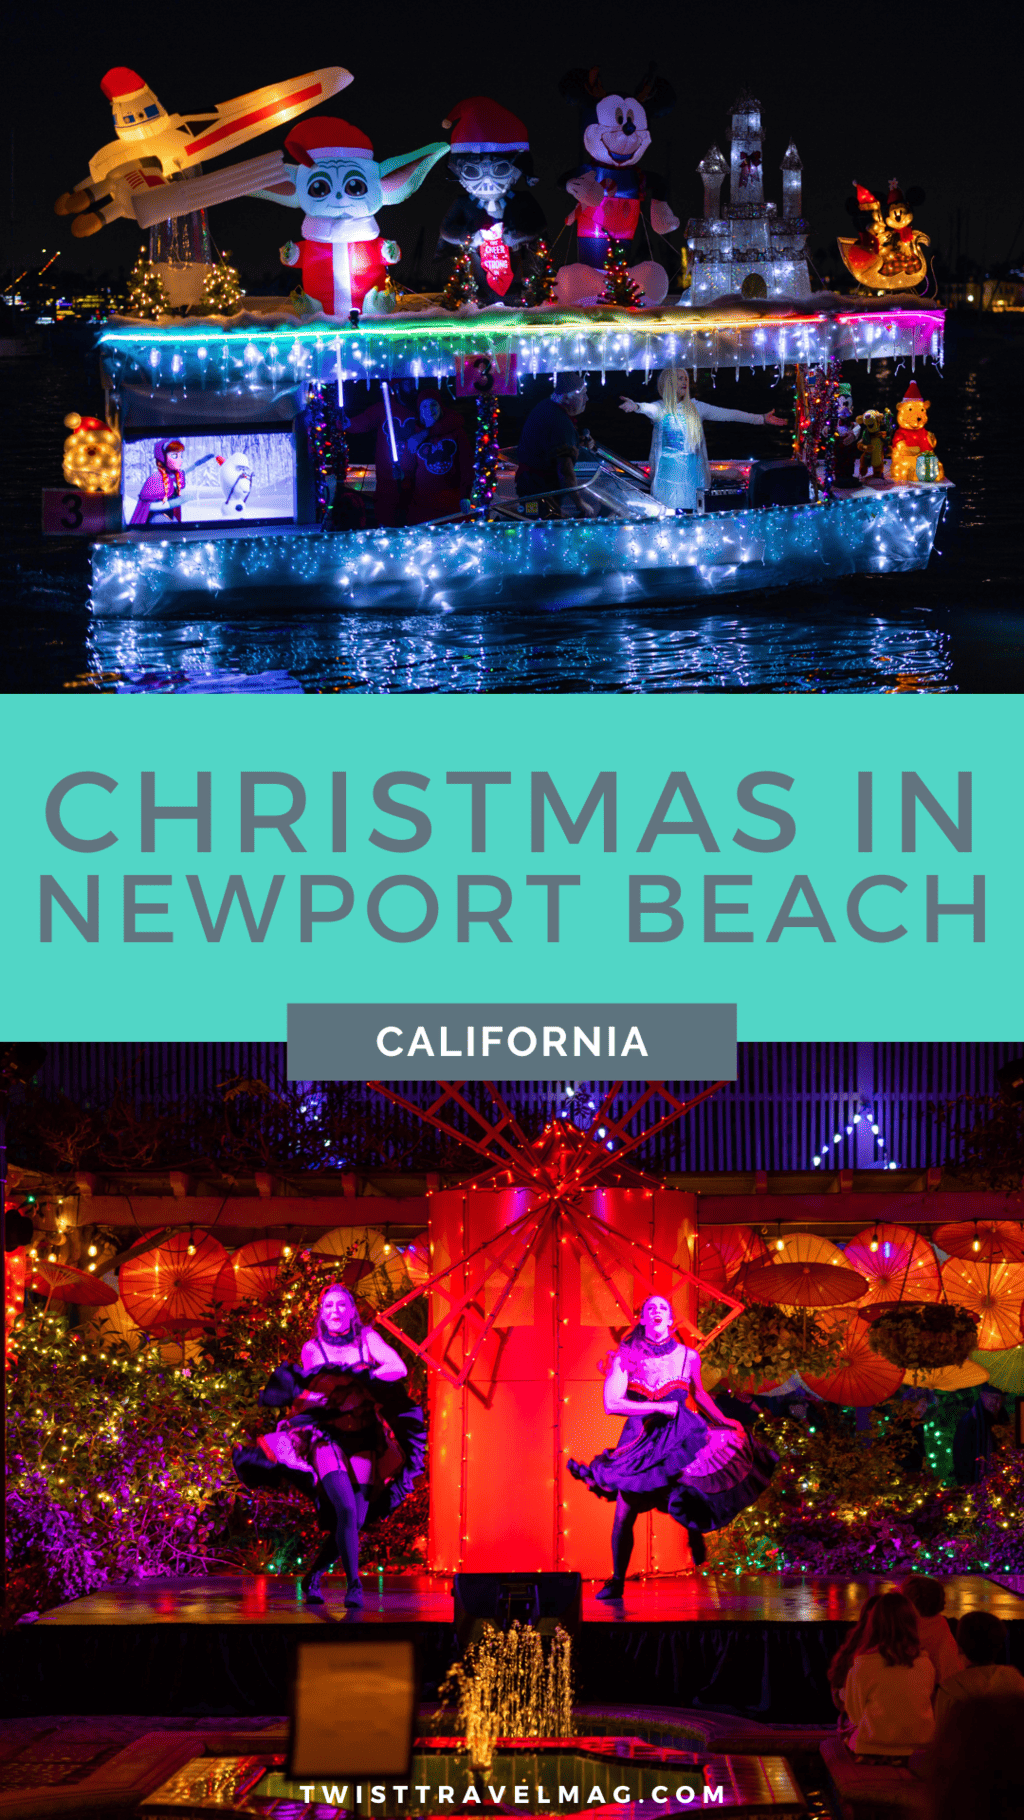 Things to do in Newport Beach at Christmas in California